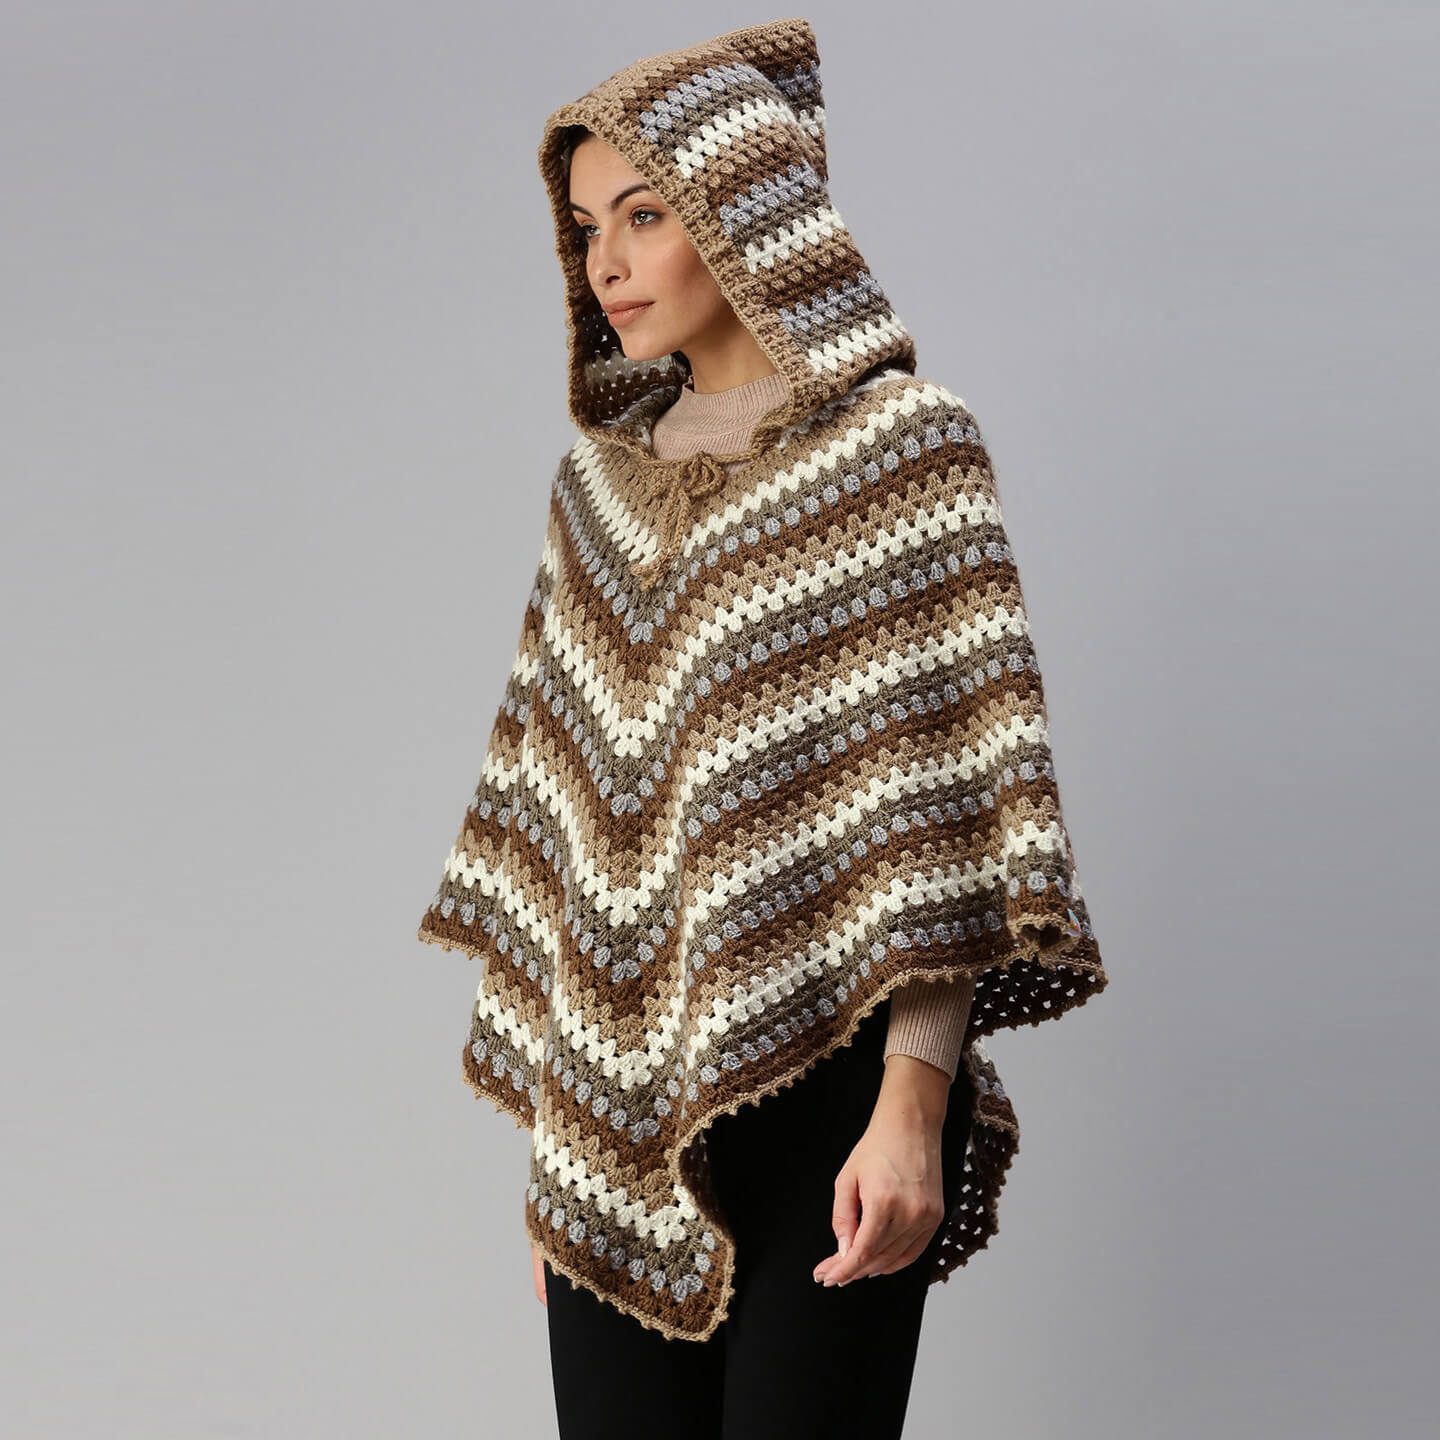 Shades of Brown Poncho with Hood 2912